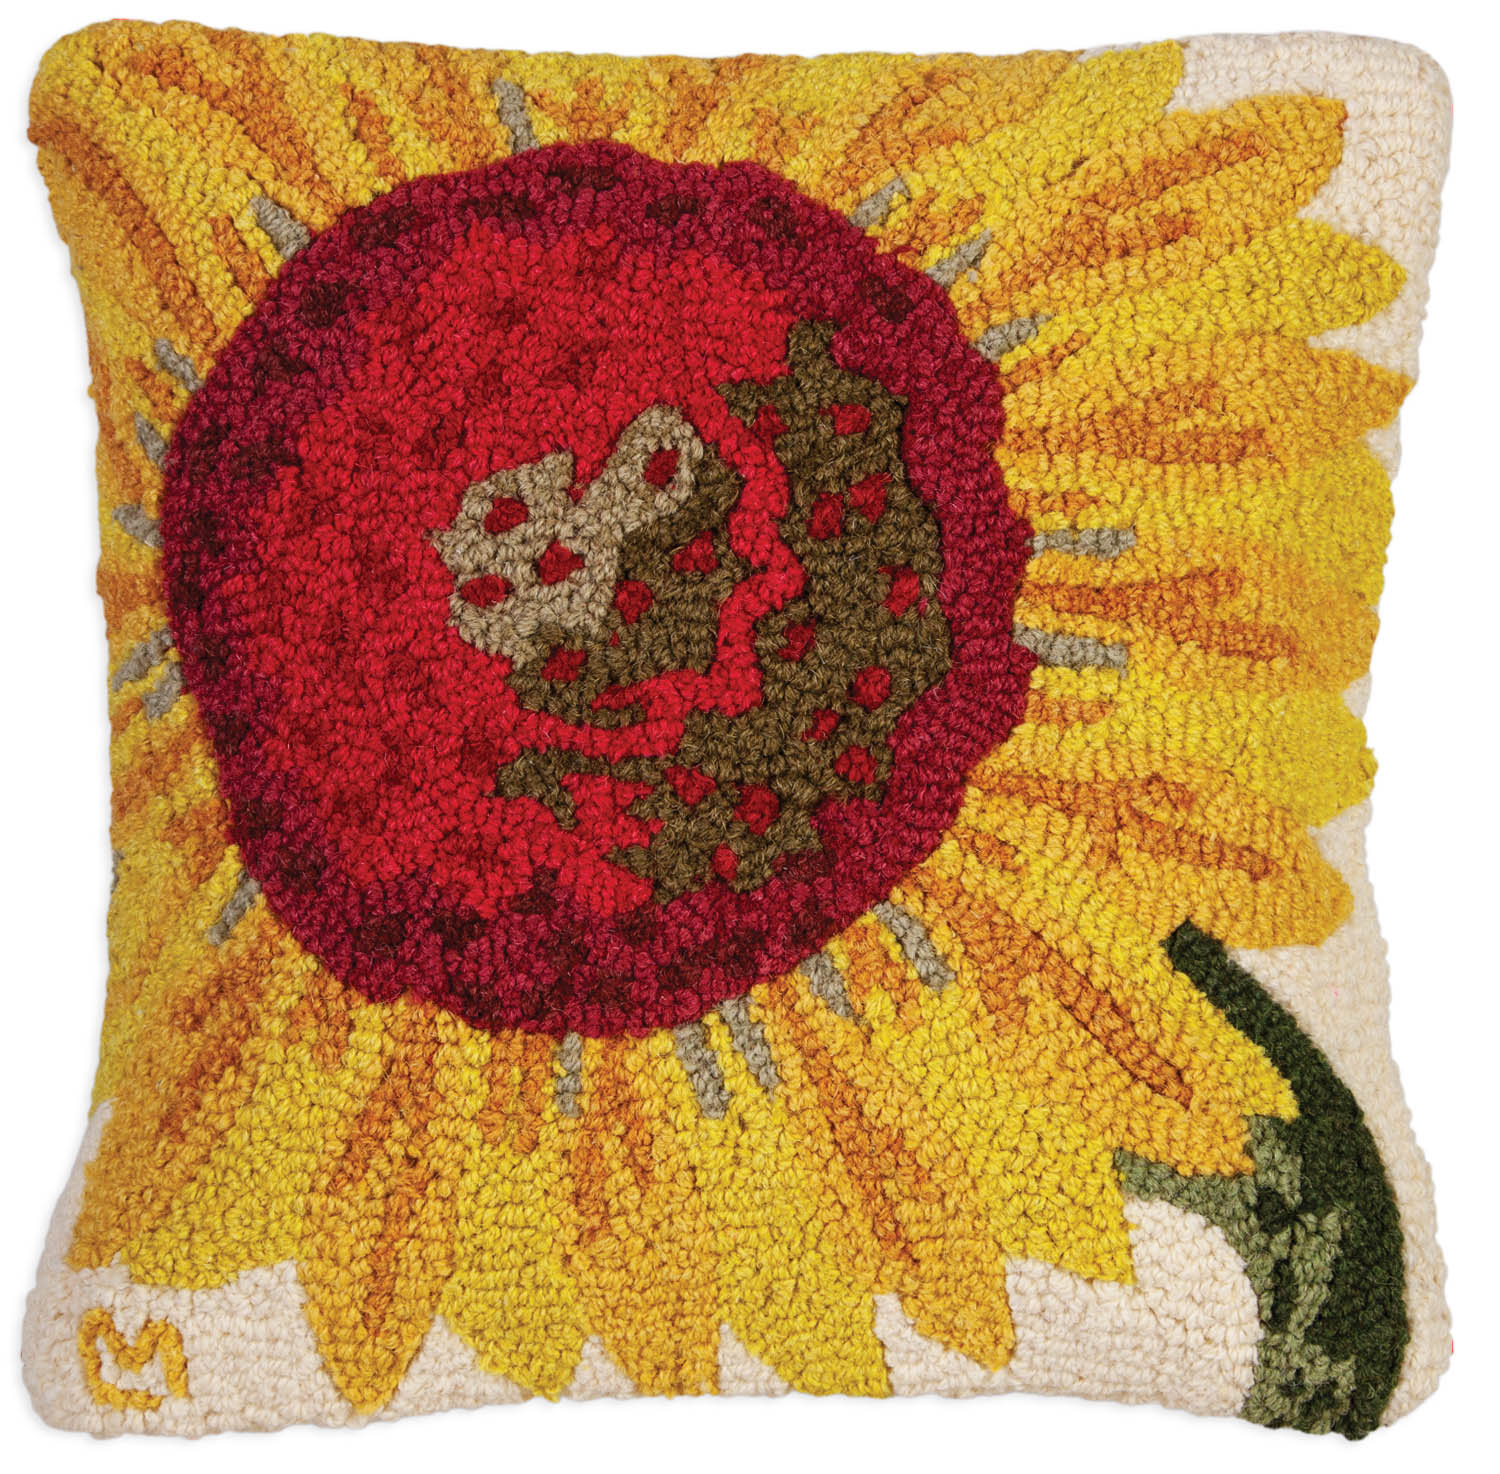 Radiant sunflower hooked wool pillow